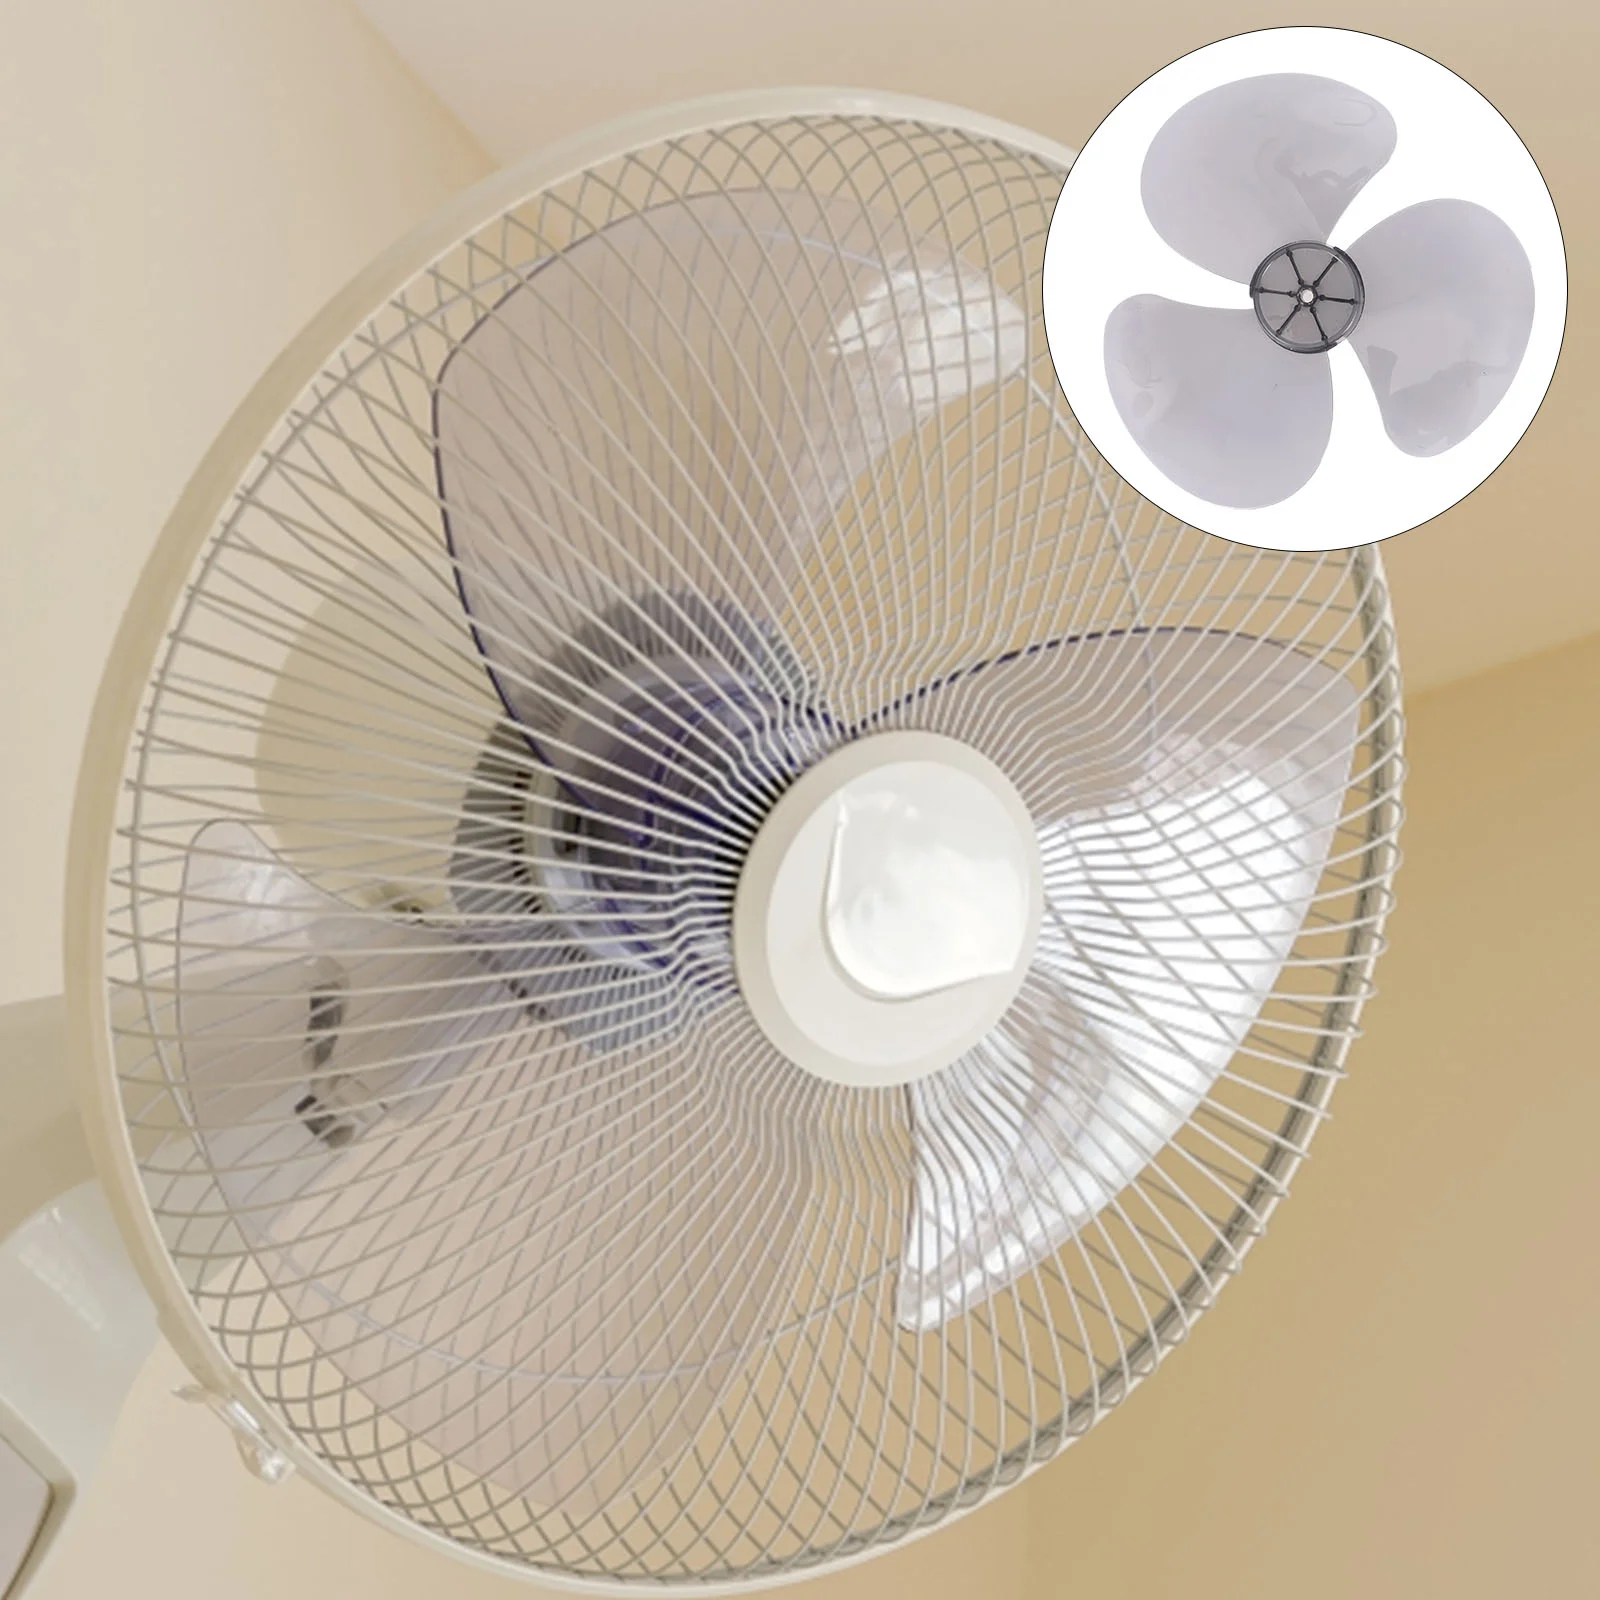 Plastic Baby Accessories Blades Electric Baby Accessories Nut Cover Pedestal Floor Table Replacement 12 Inch stand fans solar standing fan bldc 5 blades cooler oscillating pedestal stand 3 speed fan dc electric 18 inch oem 12v floor 22w